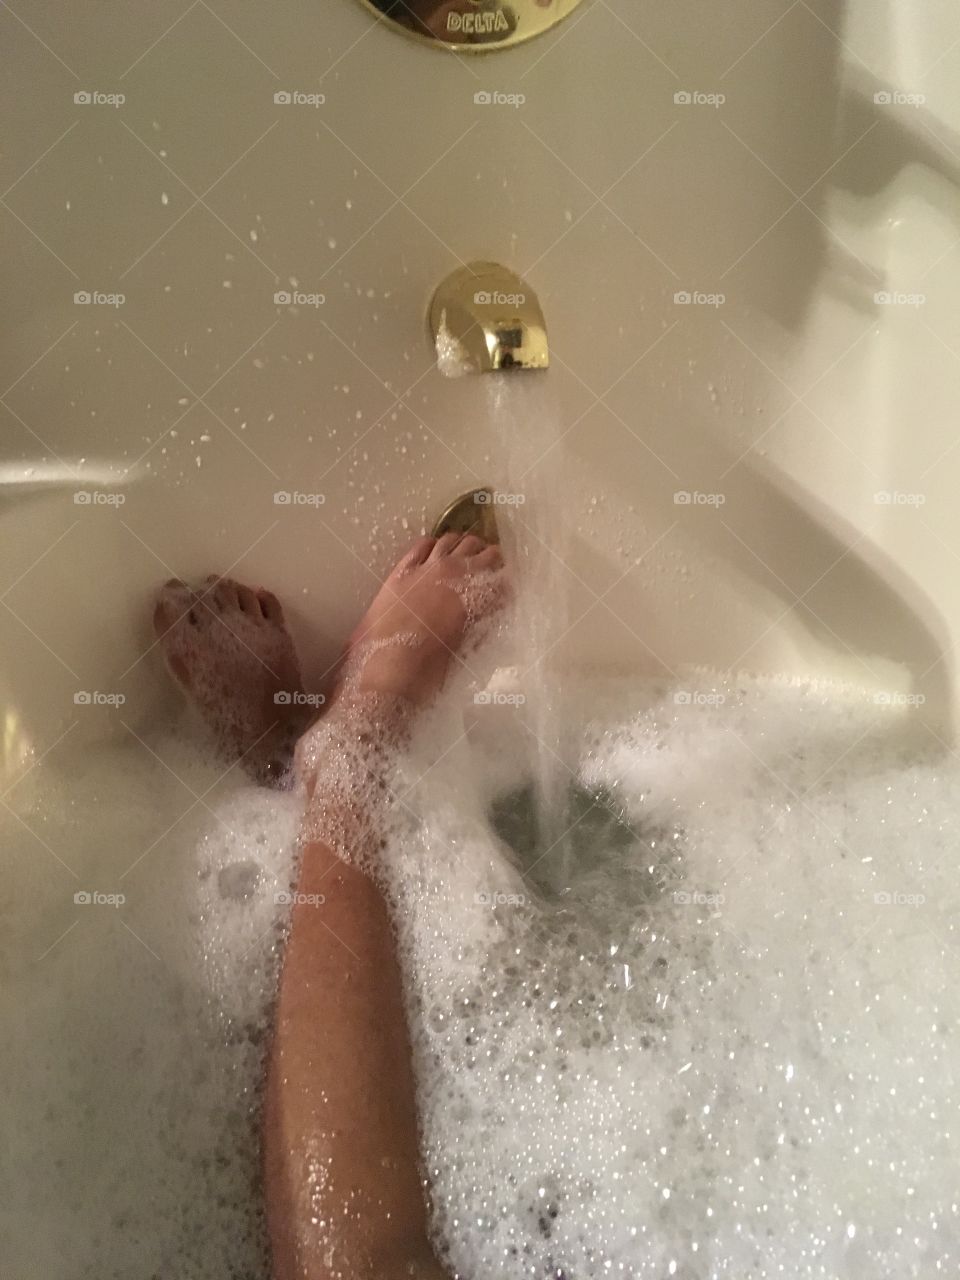 Bubble bath time.  Time to relax.